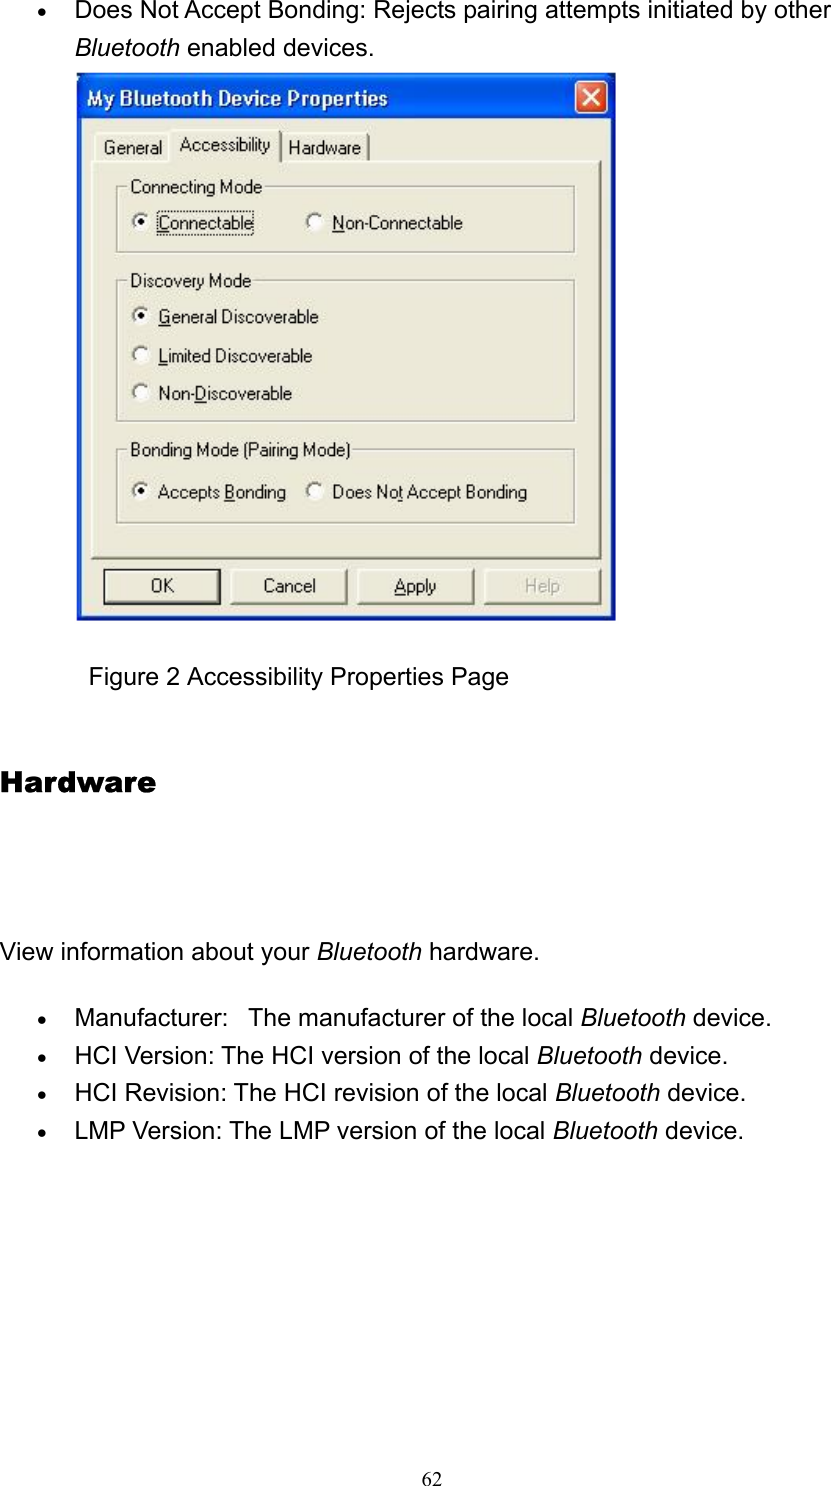   62• Does Not Accept Bonding: Rejects pairing attempts initiated by other Bluetooth enabled devices.               Figure 2 Accessibility Properties Page Hardware     View information about your Bluetooth hardware. • Manufacturer:   The manufacturer of the local Bluetooth device.   • HCI Version: The HCI version of the local Bluetooth device.   • HCI Revision: The HCI revision of the local Bluetooth device.   • LMP Version: The LMP version of the local Bluetooth device.   